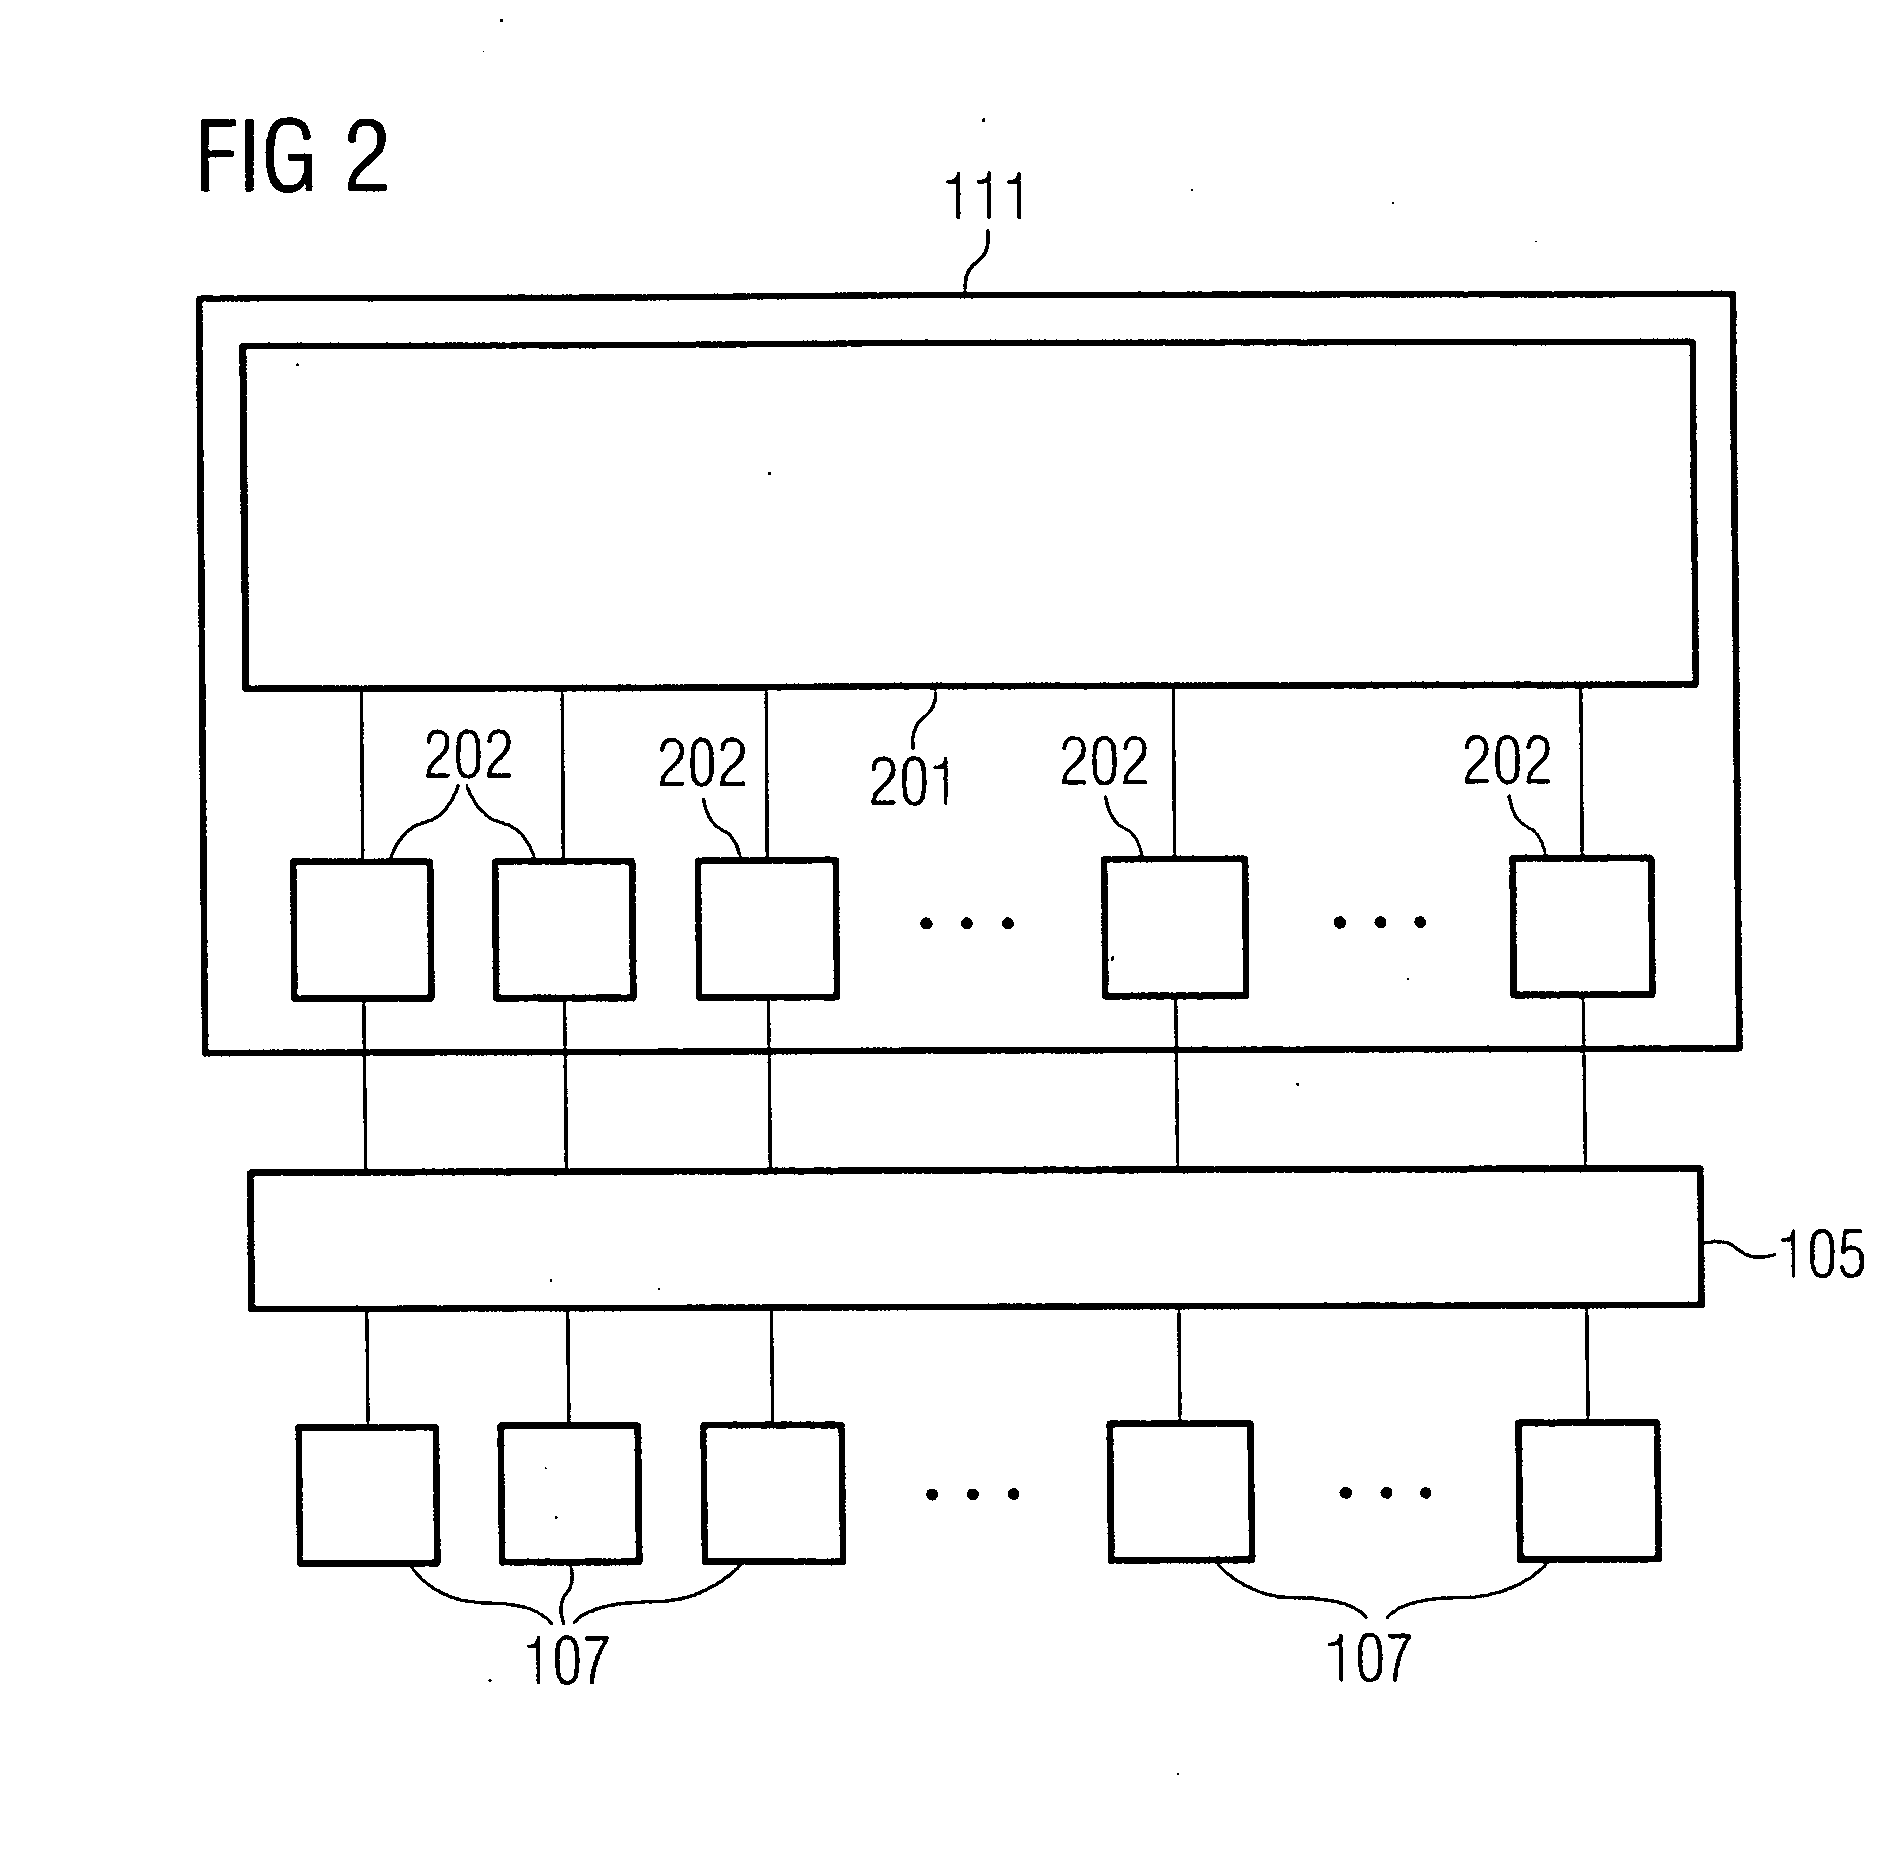 Memory circuit arrangement and method for reading and/or verifying the status of memory cells of a memory cell array